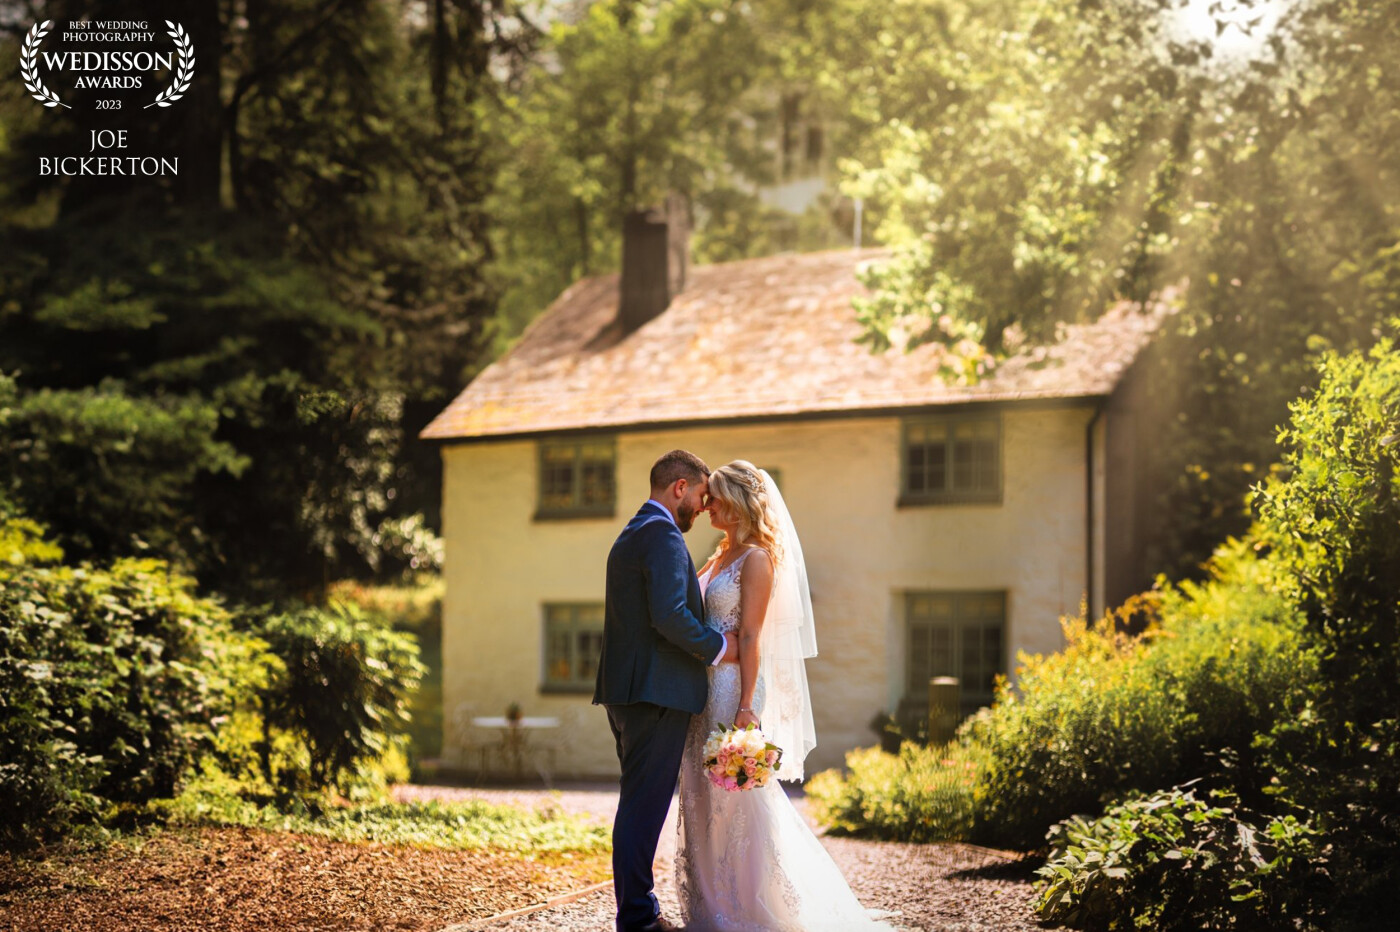 Paige & Steve's wedding at Tyn Dwr Hall in North Wales was magical.  I loved this particular setting in the woodland with the last of the days sunlight filtering through the trees and lighting the dress & veil.